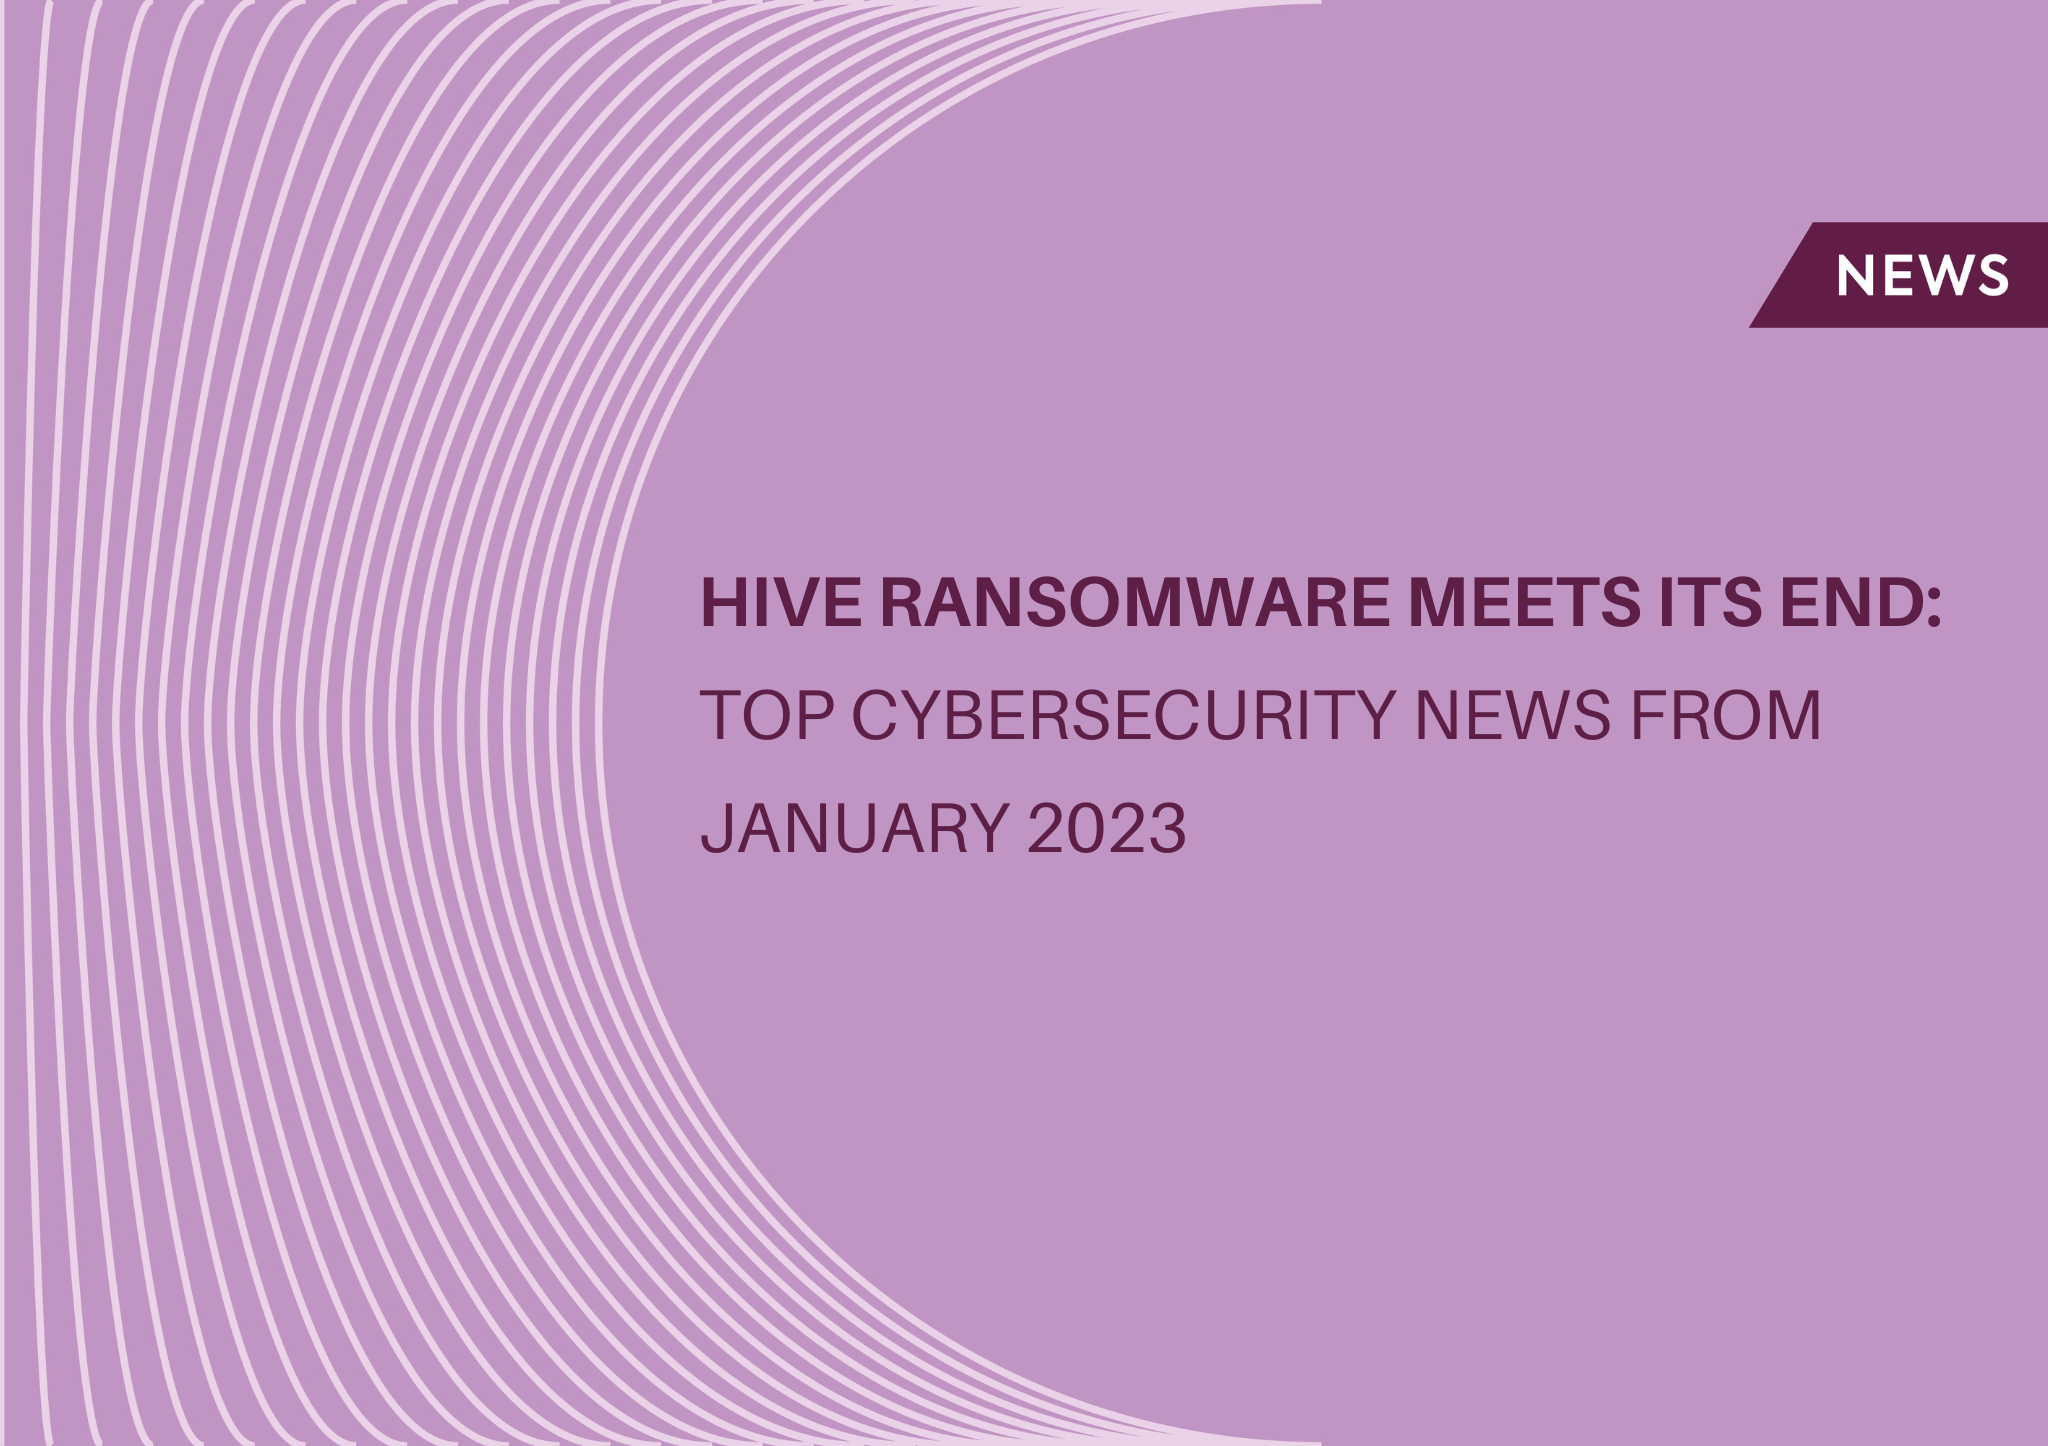 Hive ransomware